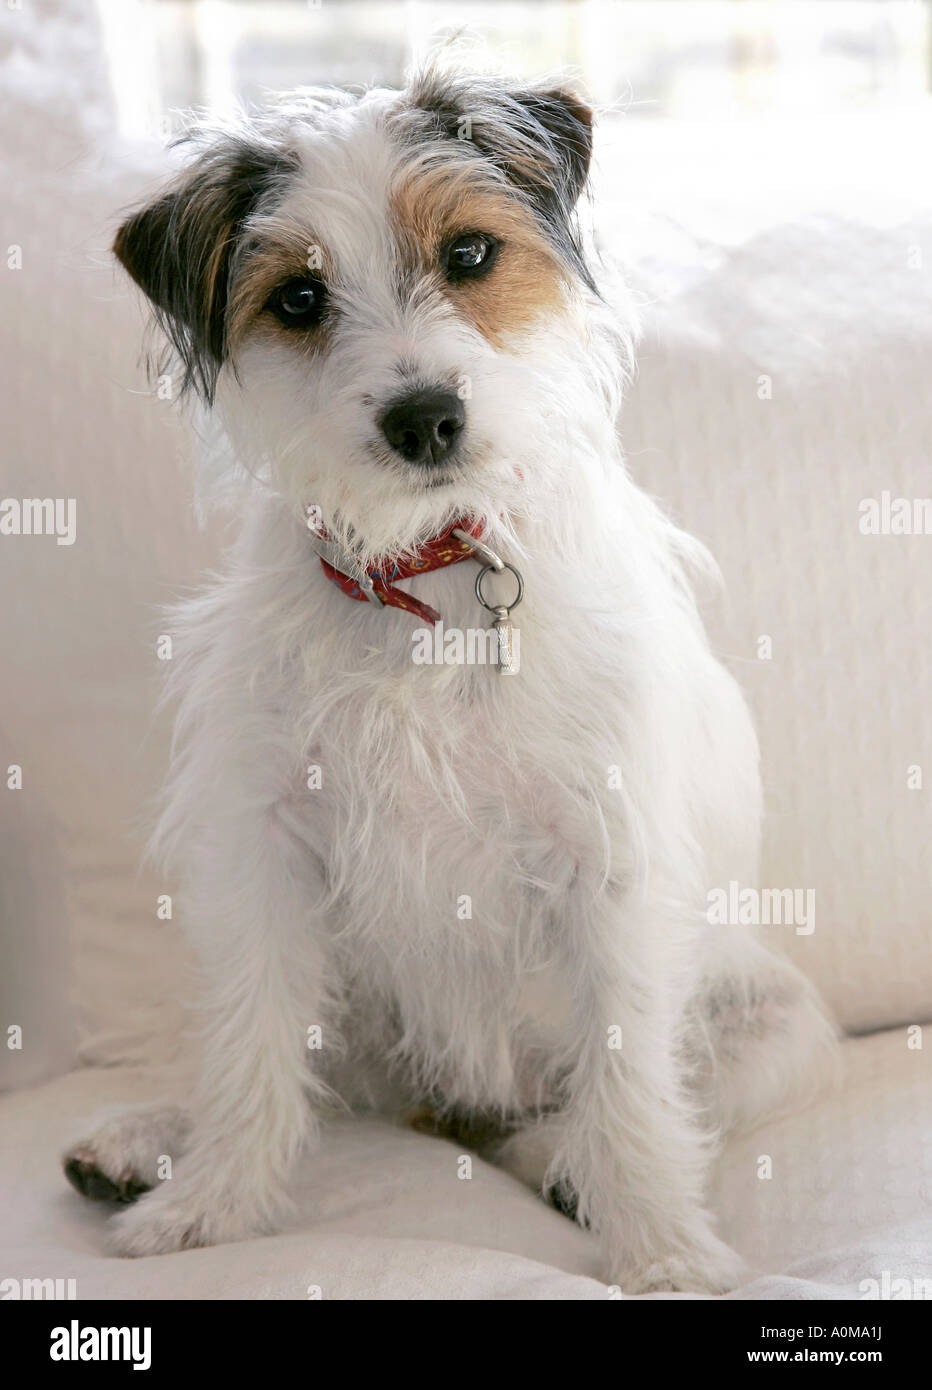 Female 11 month old broken coated <b>Jack Russell terrier</b> Stock Foto - female-11-month-old-broken-coated-jack-russell-terrier-A0MA1J